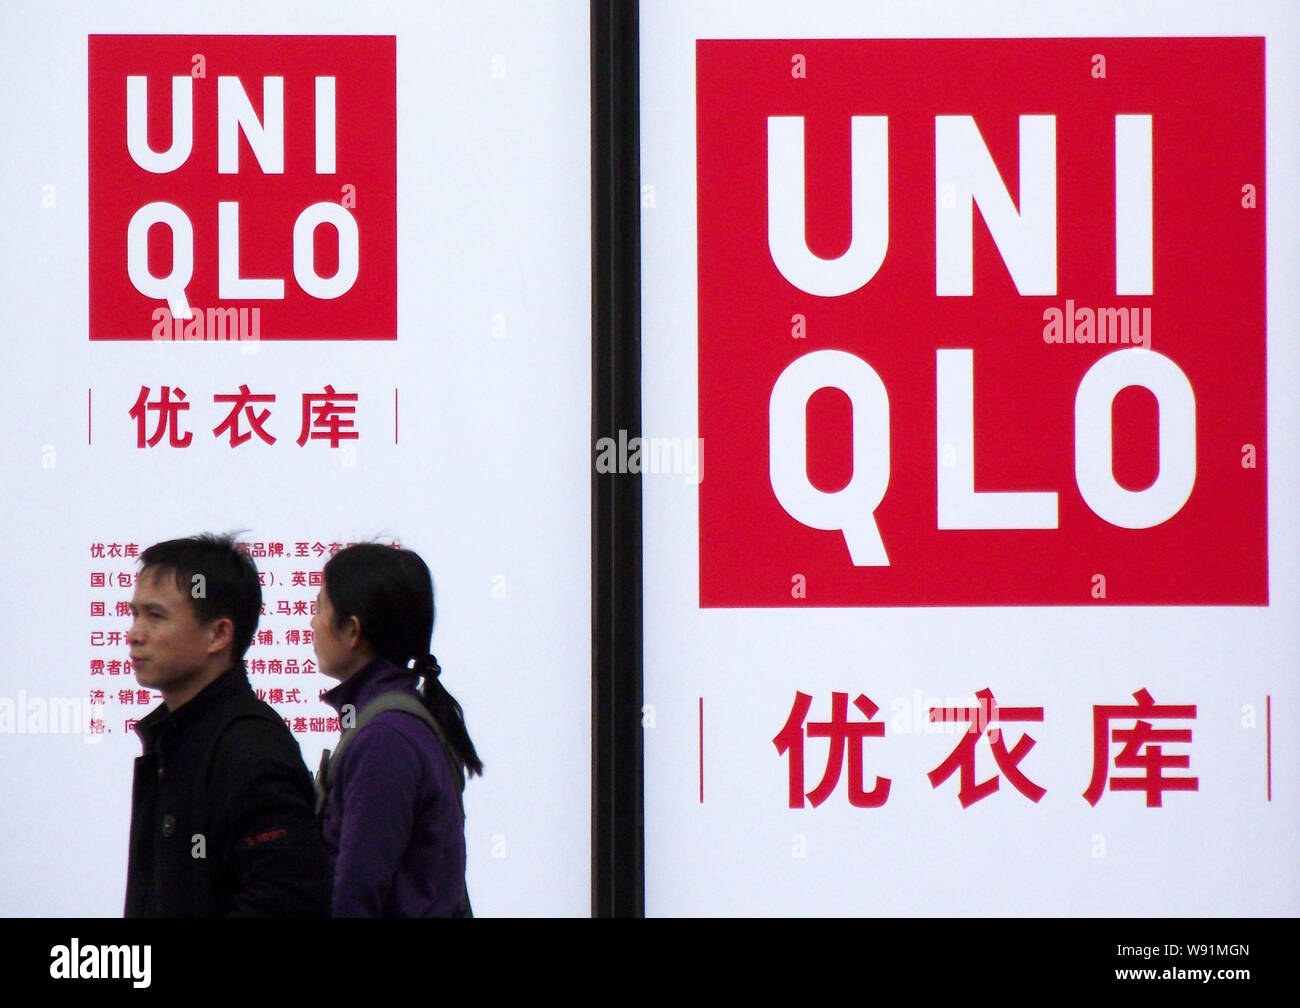 FILE--Pedestrians walk past an advertisement for Uniqlo in Nanjing, east  Chinas Jiangsu province, 31 March 2013. Japans Fast Retailing Co., opera  Stock Photo - Alamy